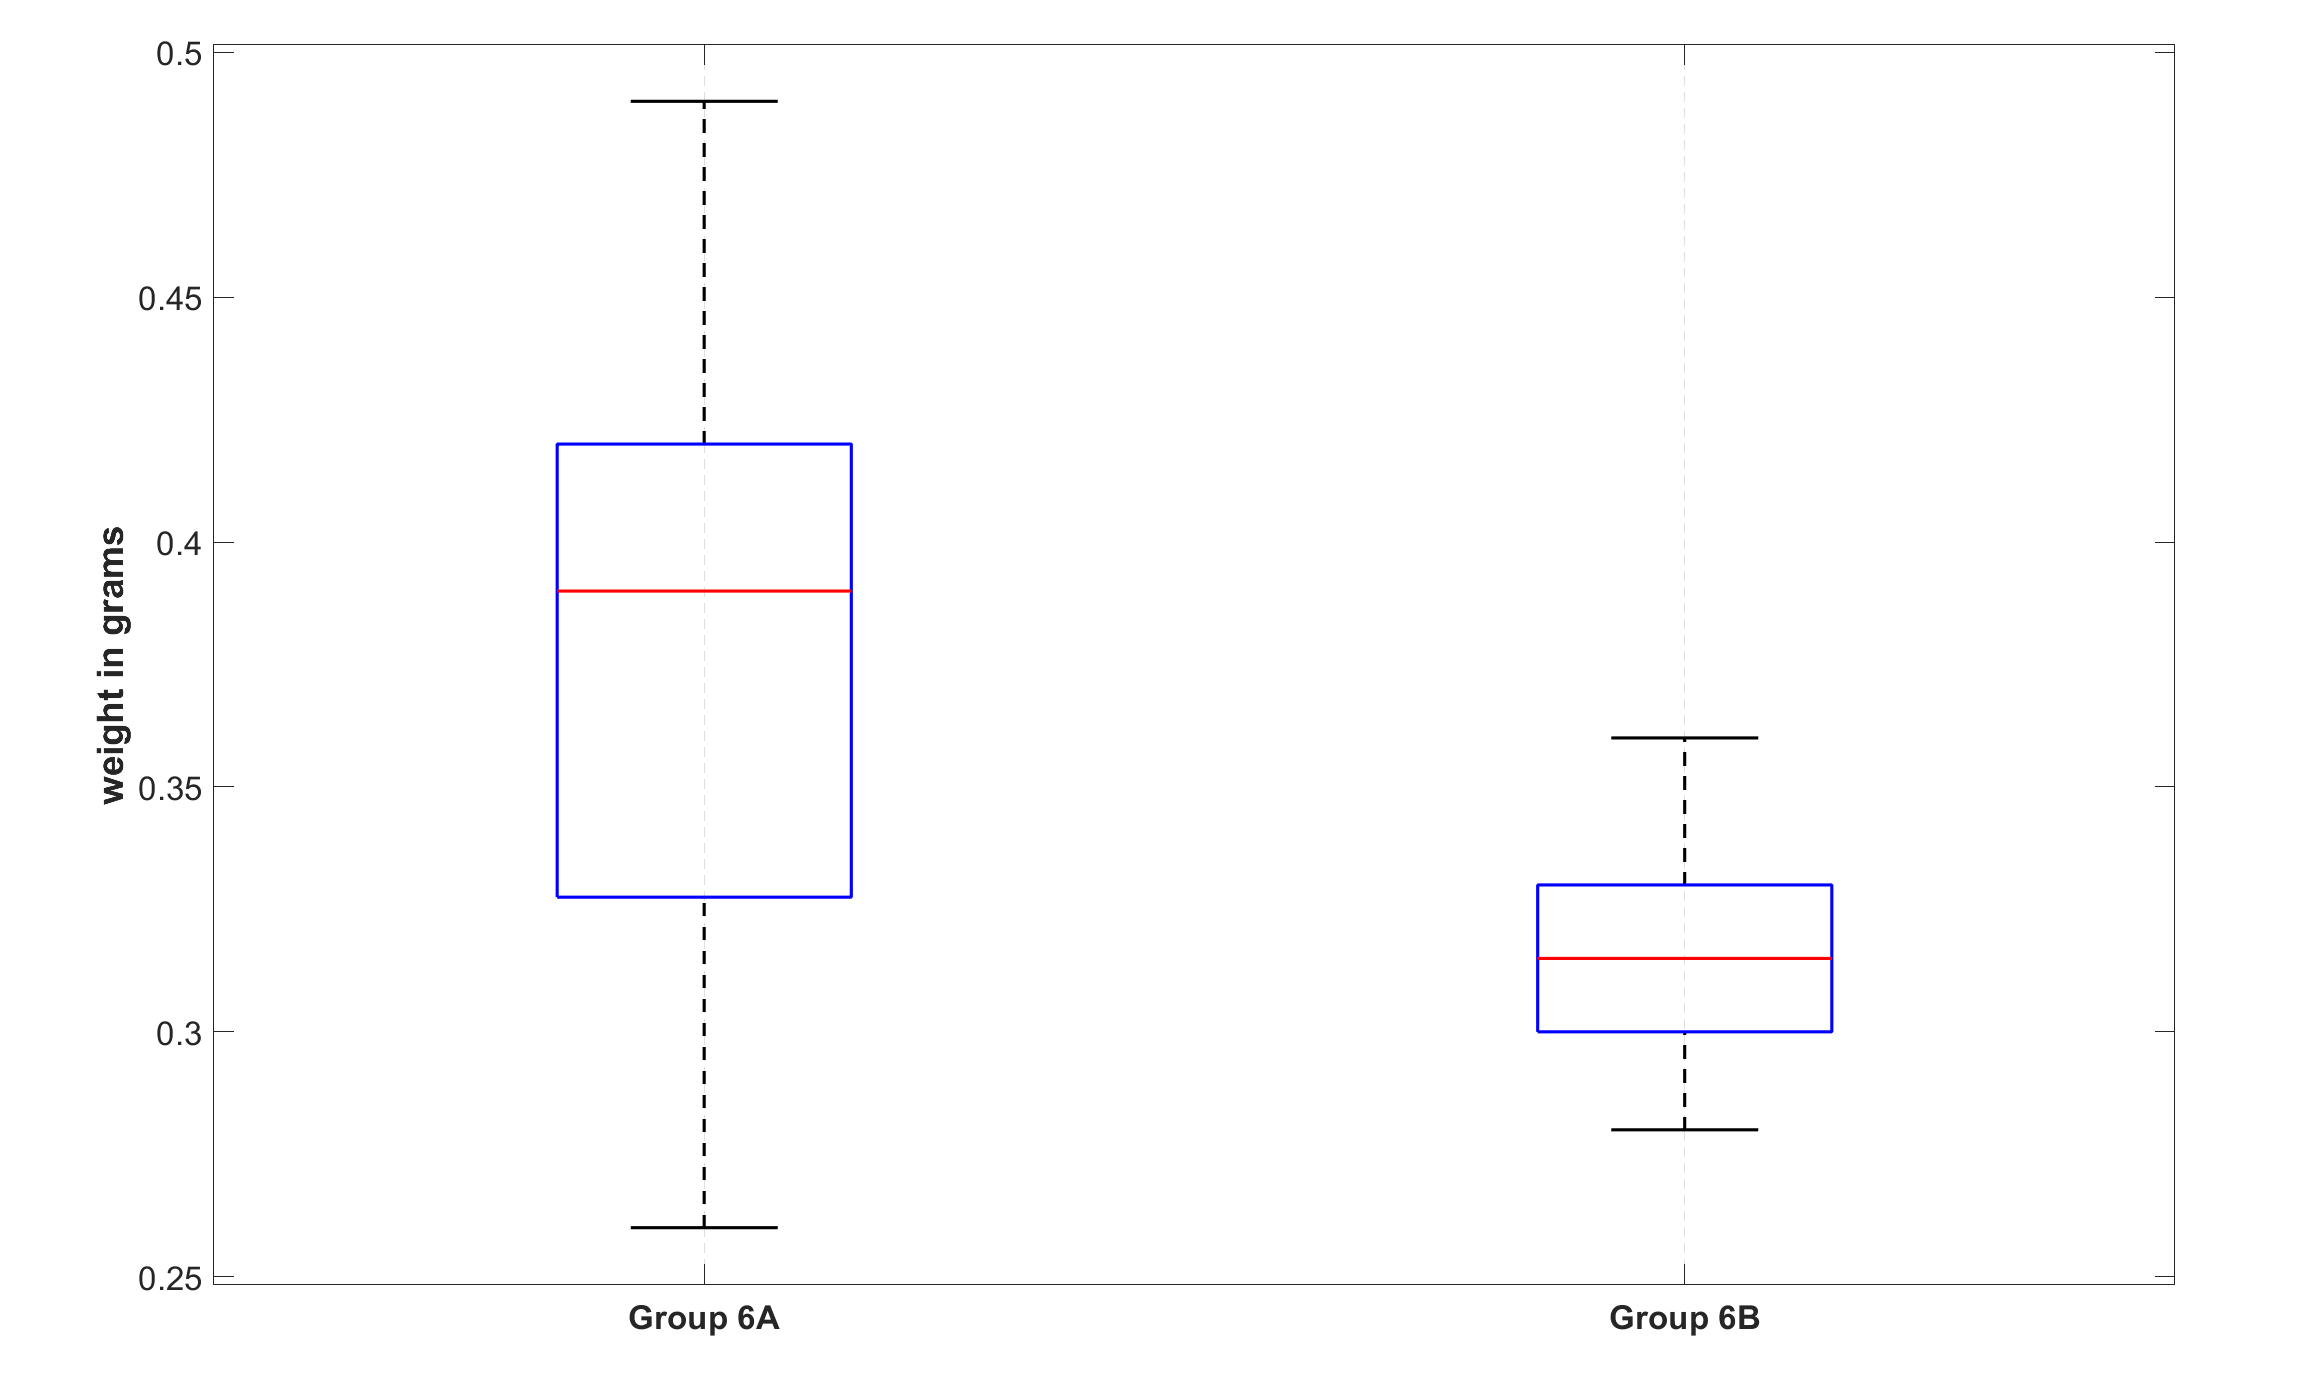 Figure 2: Box plots of Groups 6A and 6B